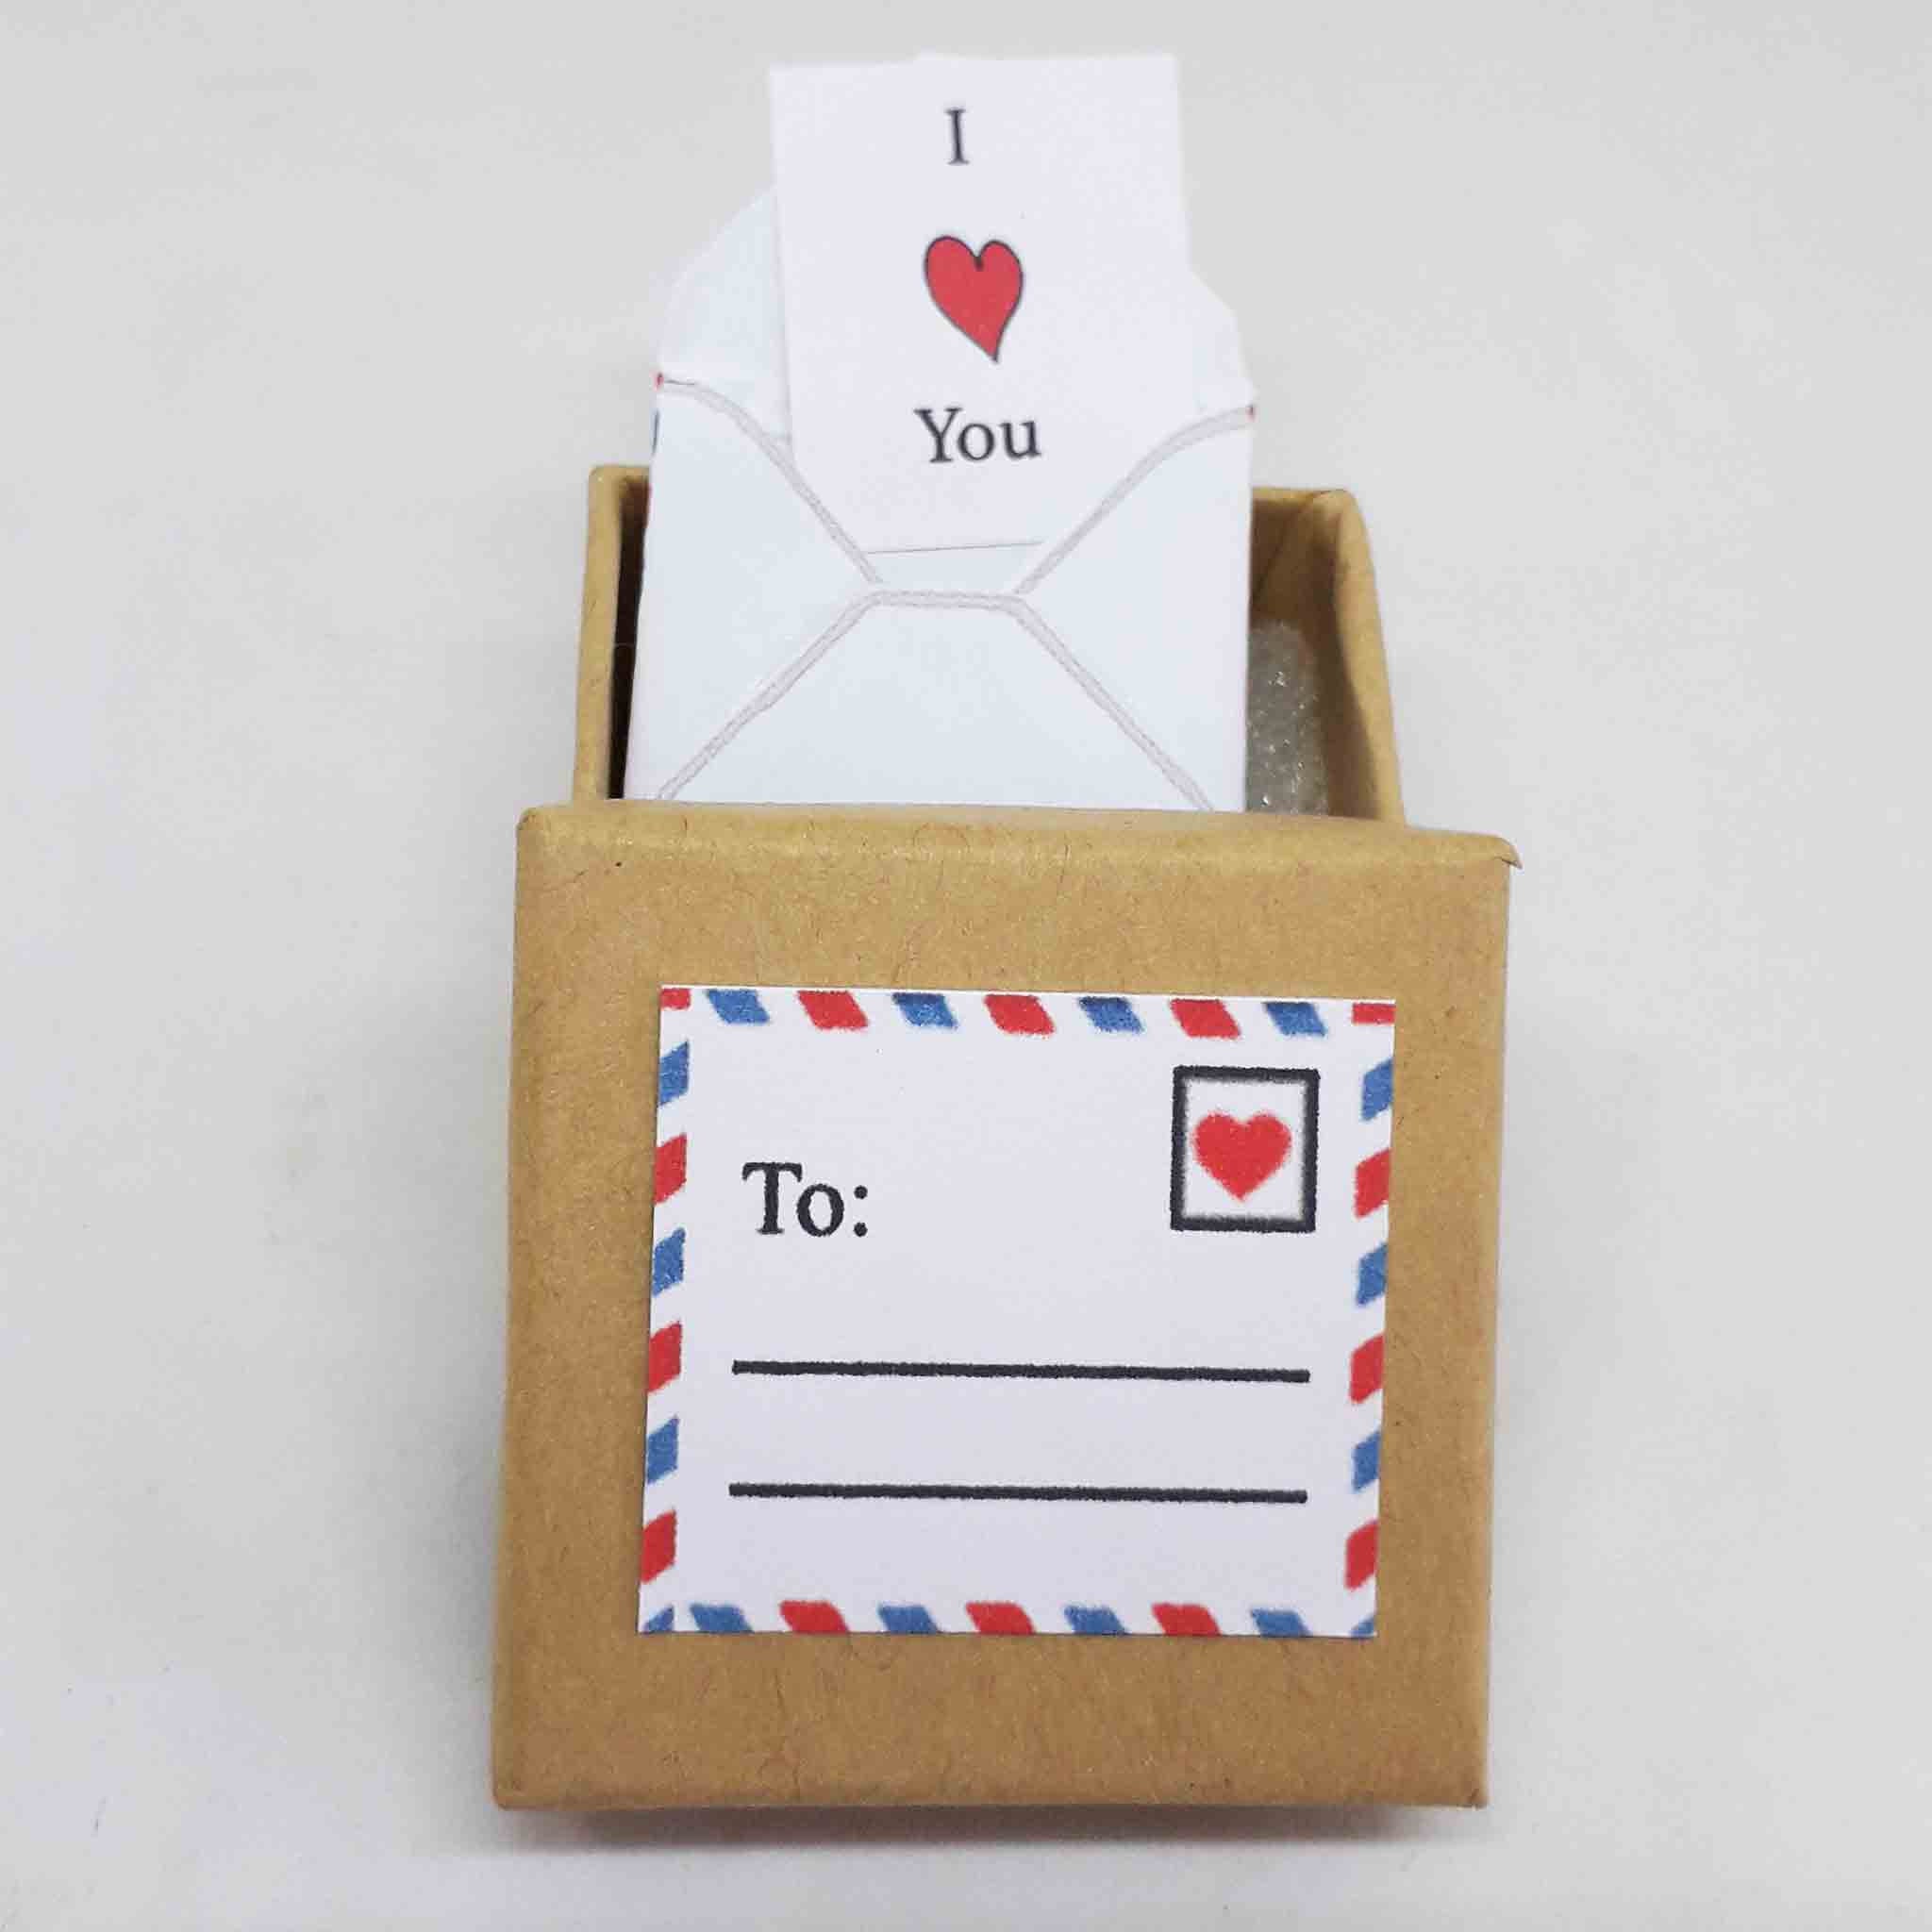 Love You Mini Cards, Set of 6 — Watercolor Lettered Mini Notes for Gifts,  Bouquets, Etc | Mini Cards by CharmCat